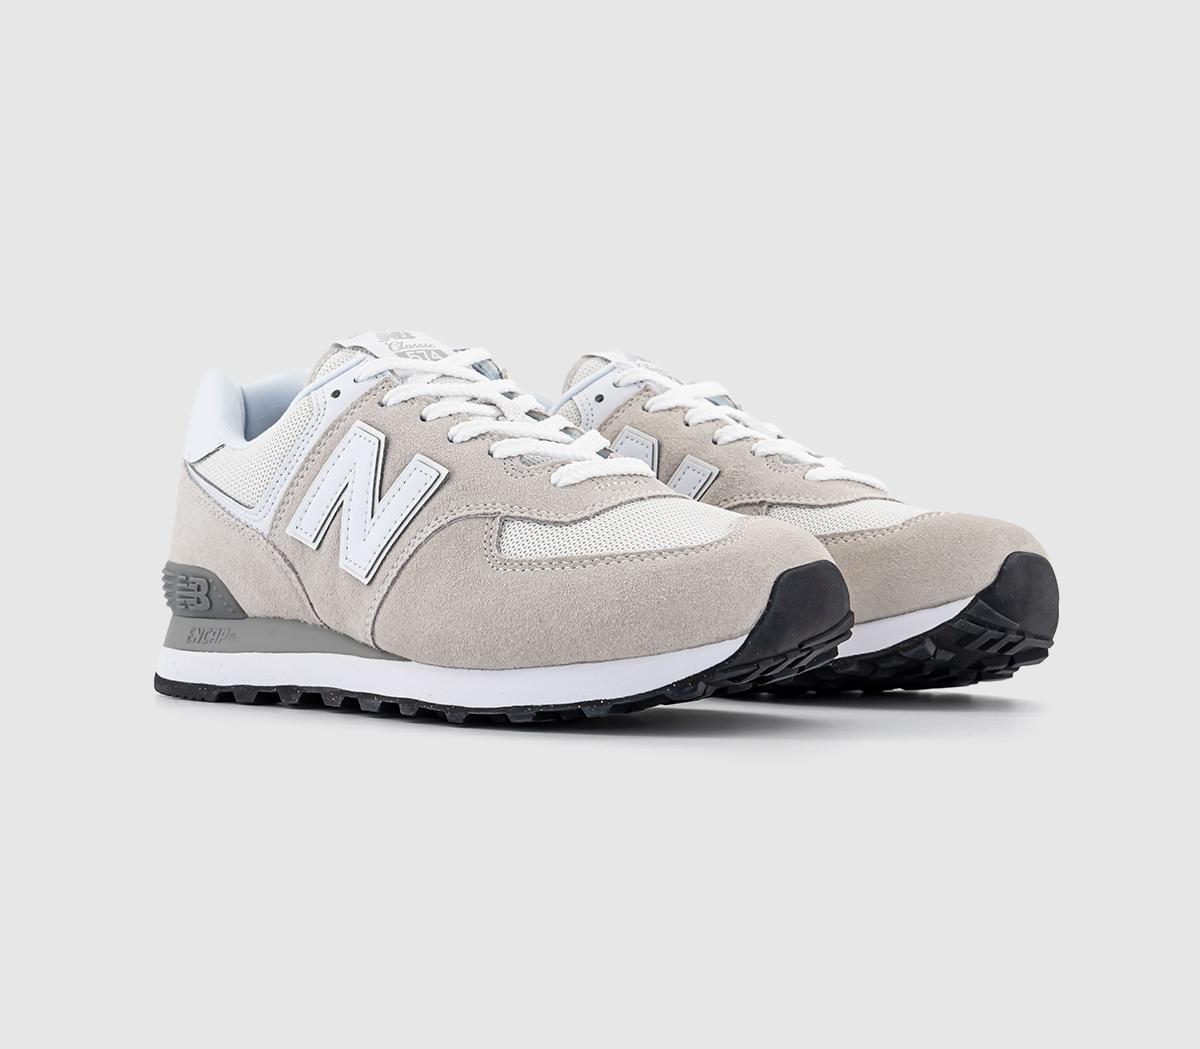 New Balance Mens 574 Trainers Light Grey White Black Green Leaf Rubber, 10